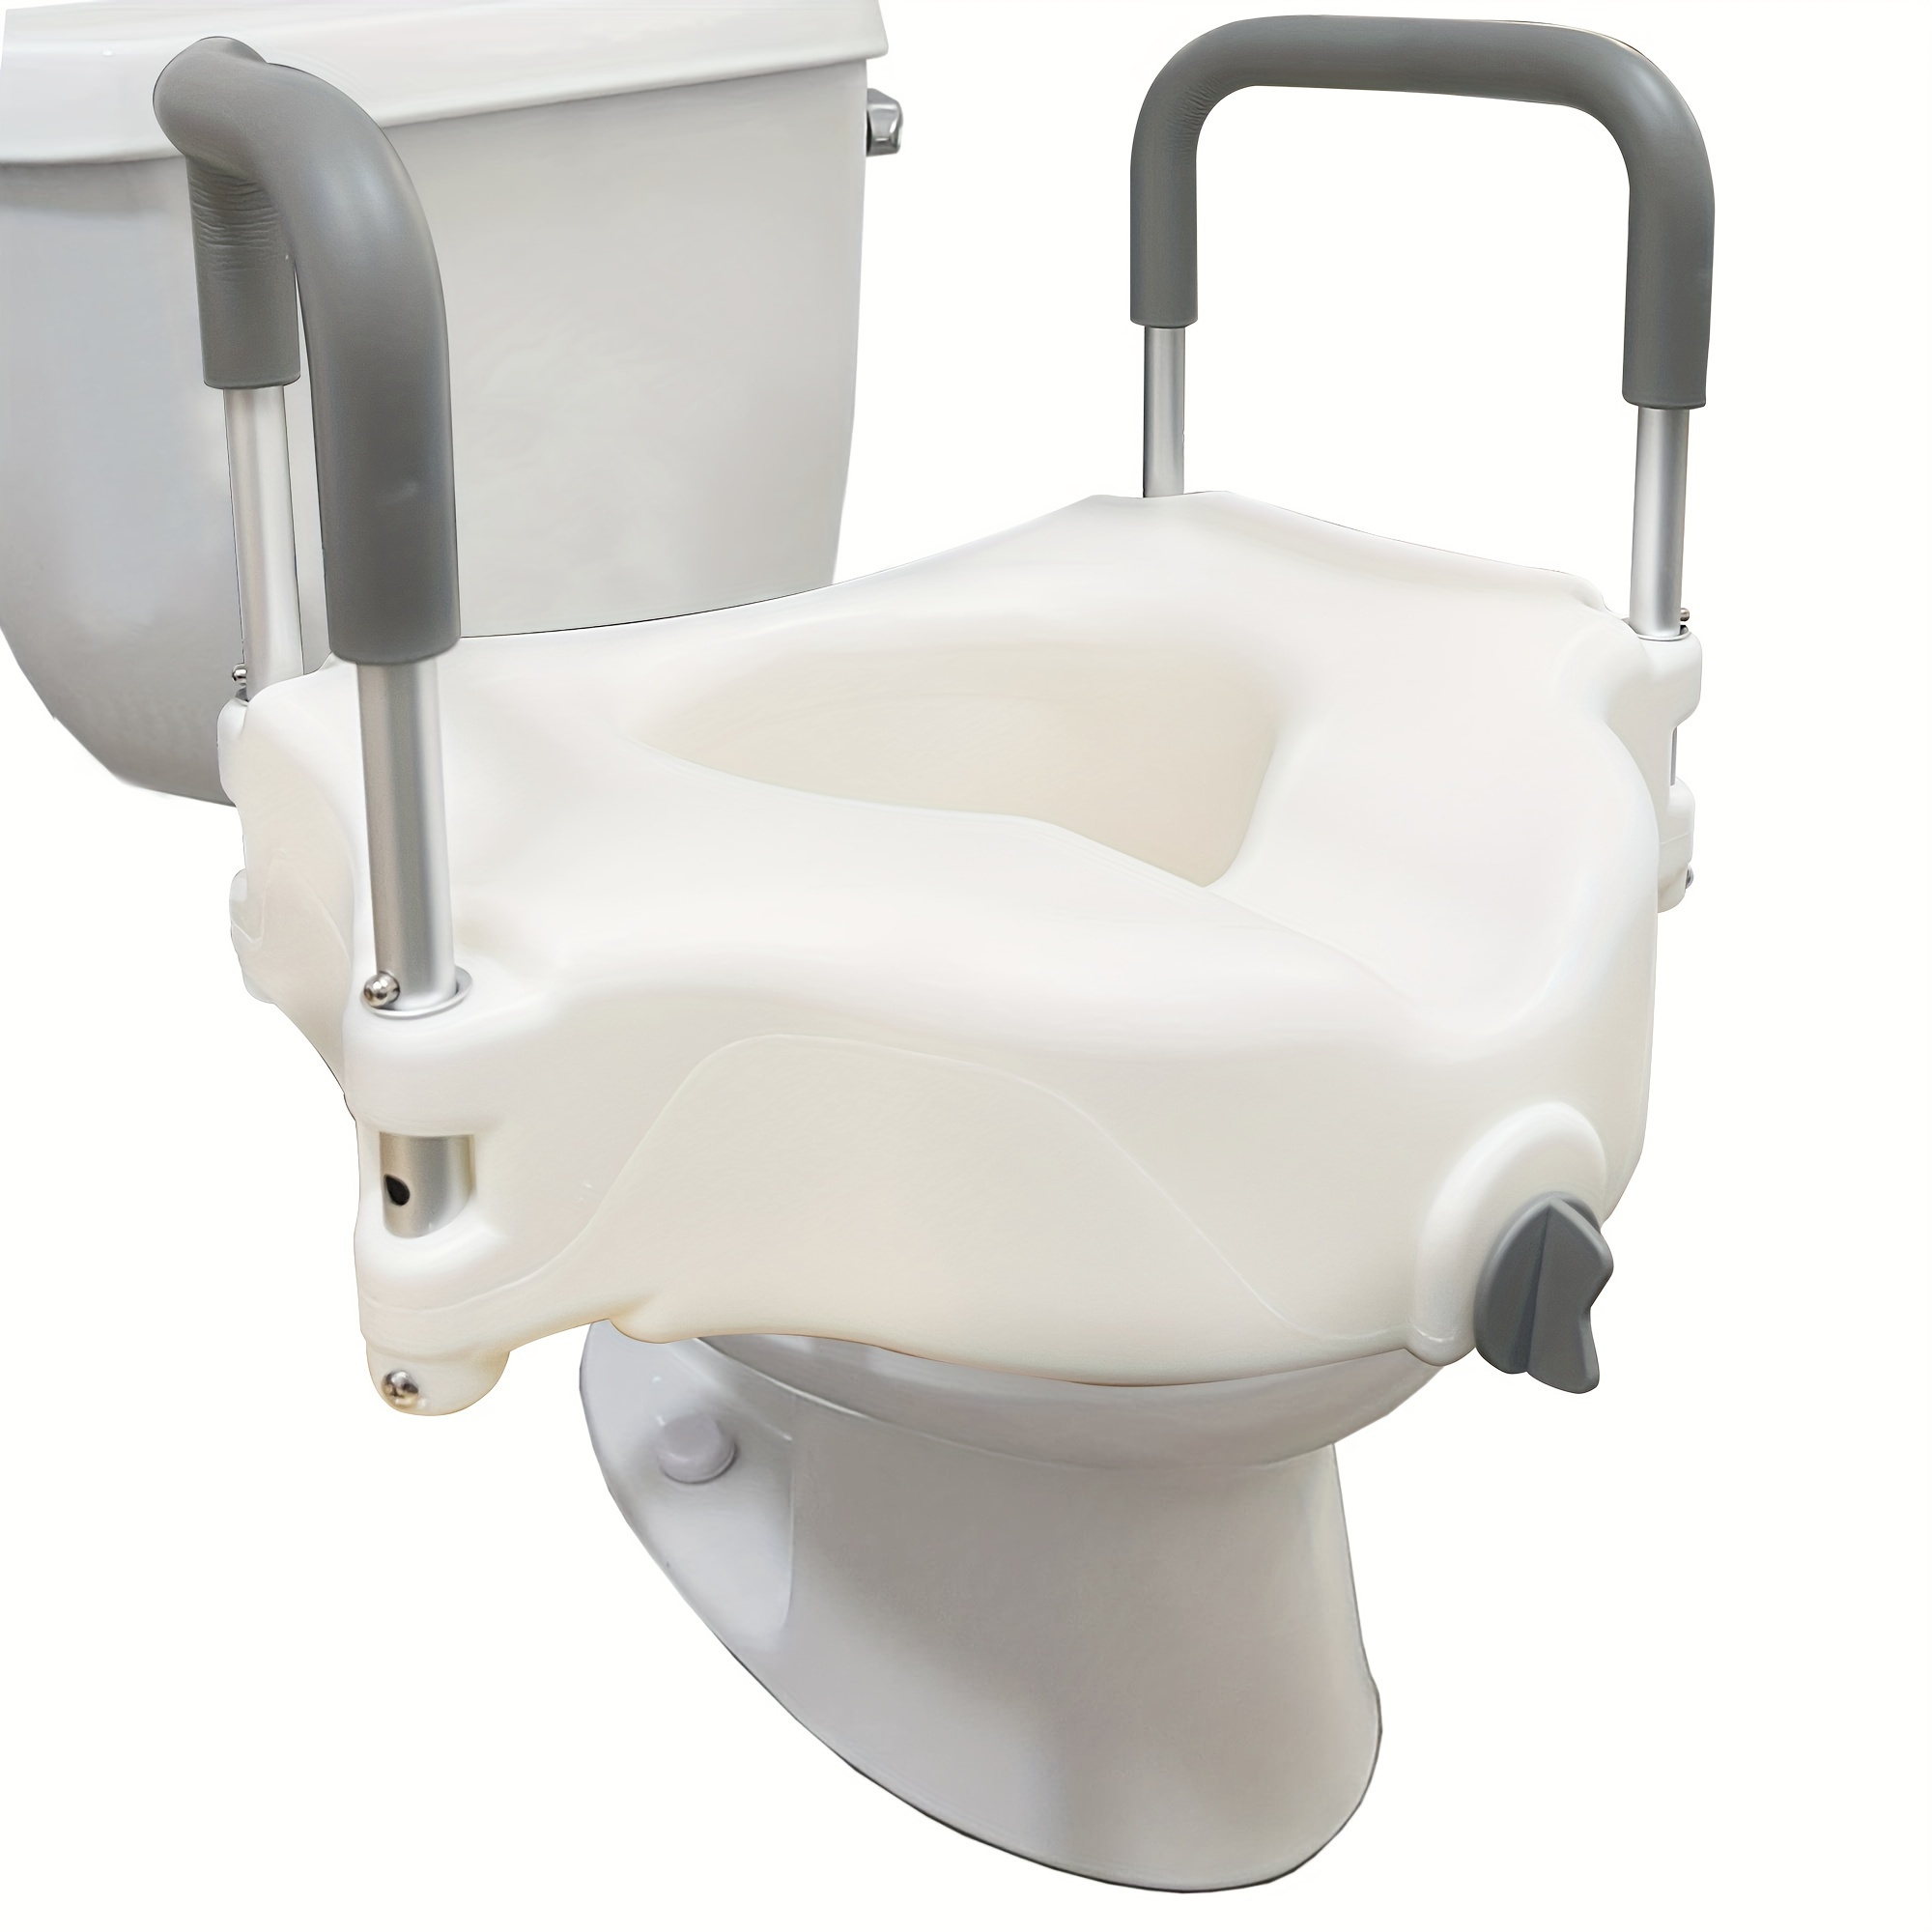 Foldable Potty Chair Household Elderly and Pregnant Woman Washable Commode  Chair Portable Non-slip Stainless Steel Potty Stool Color: A